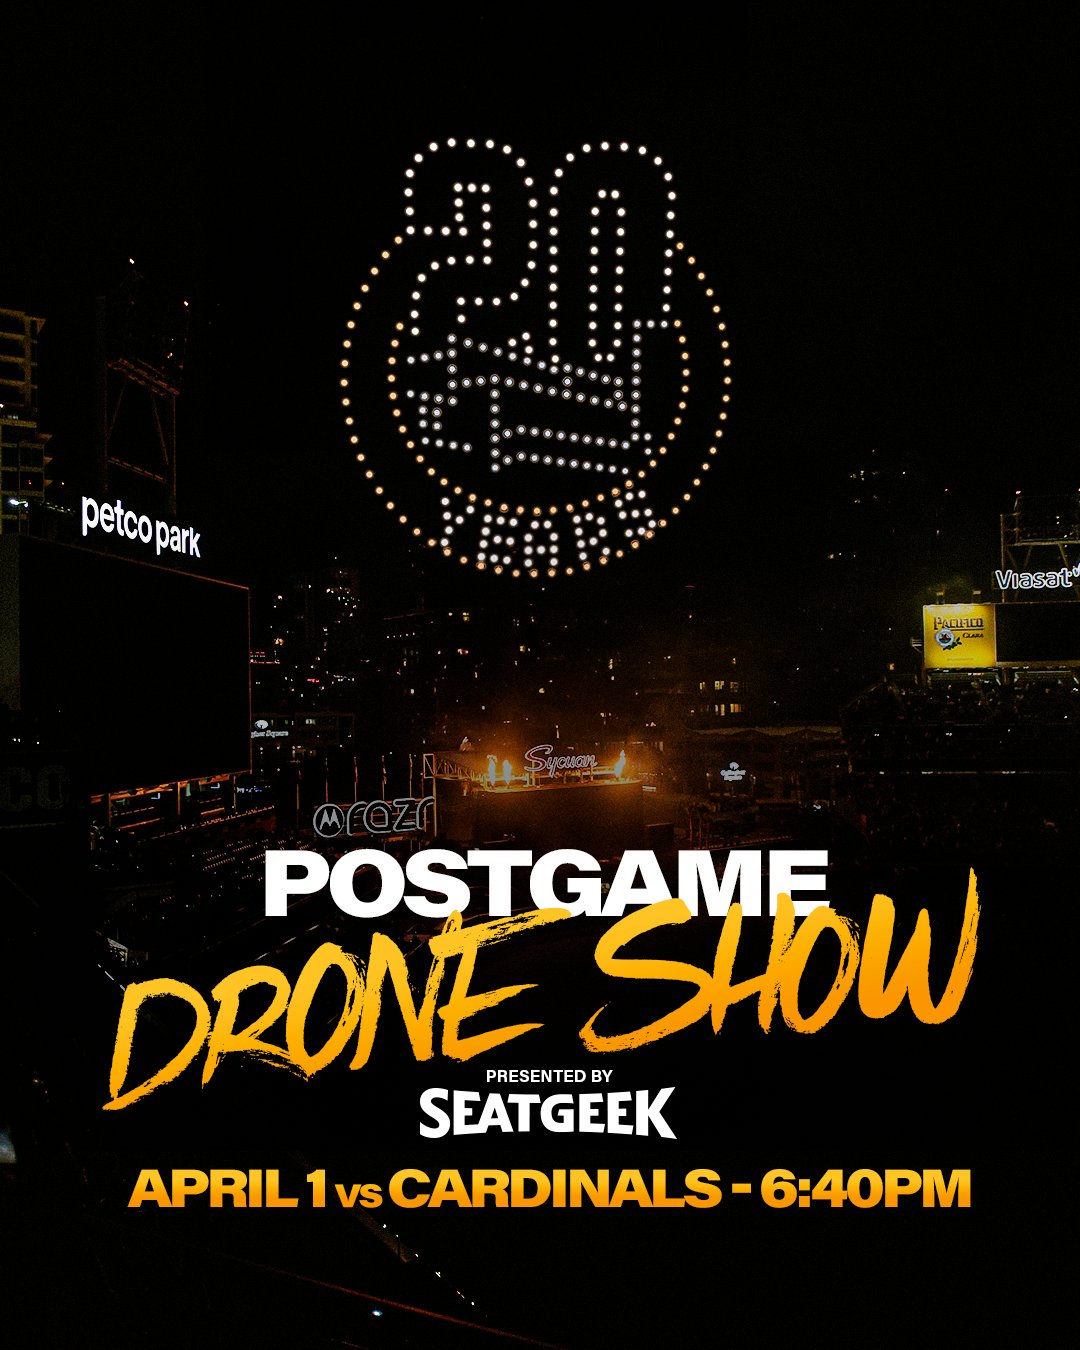 Graphic promoting a postgame drone show (presented by SeatGeek) on April 1 vs. Cardinals at 6:40pm PT. The photo in the graphic shows Petco Park at night. In the sky, there is an image created by drones that reads 